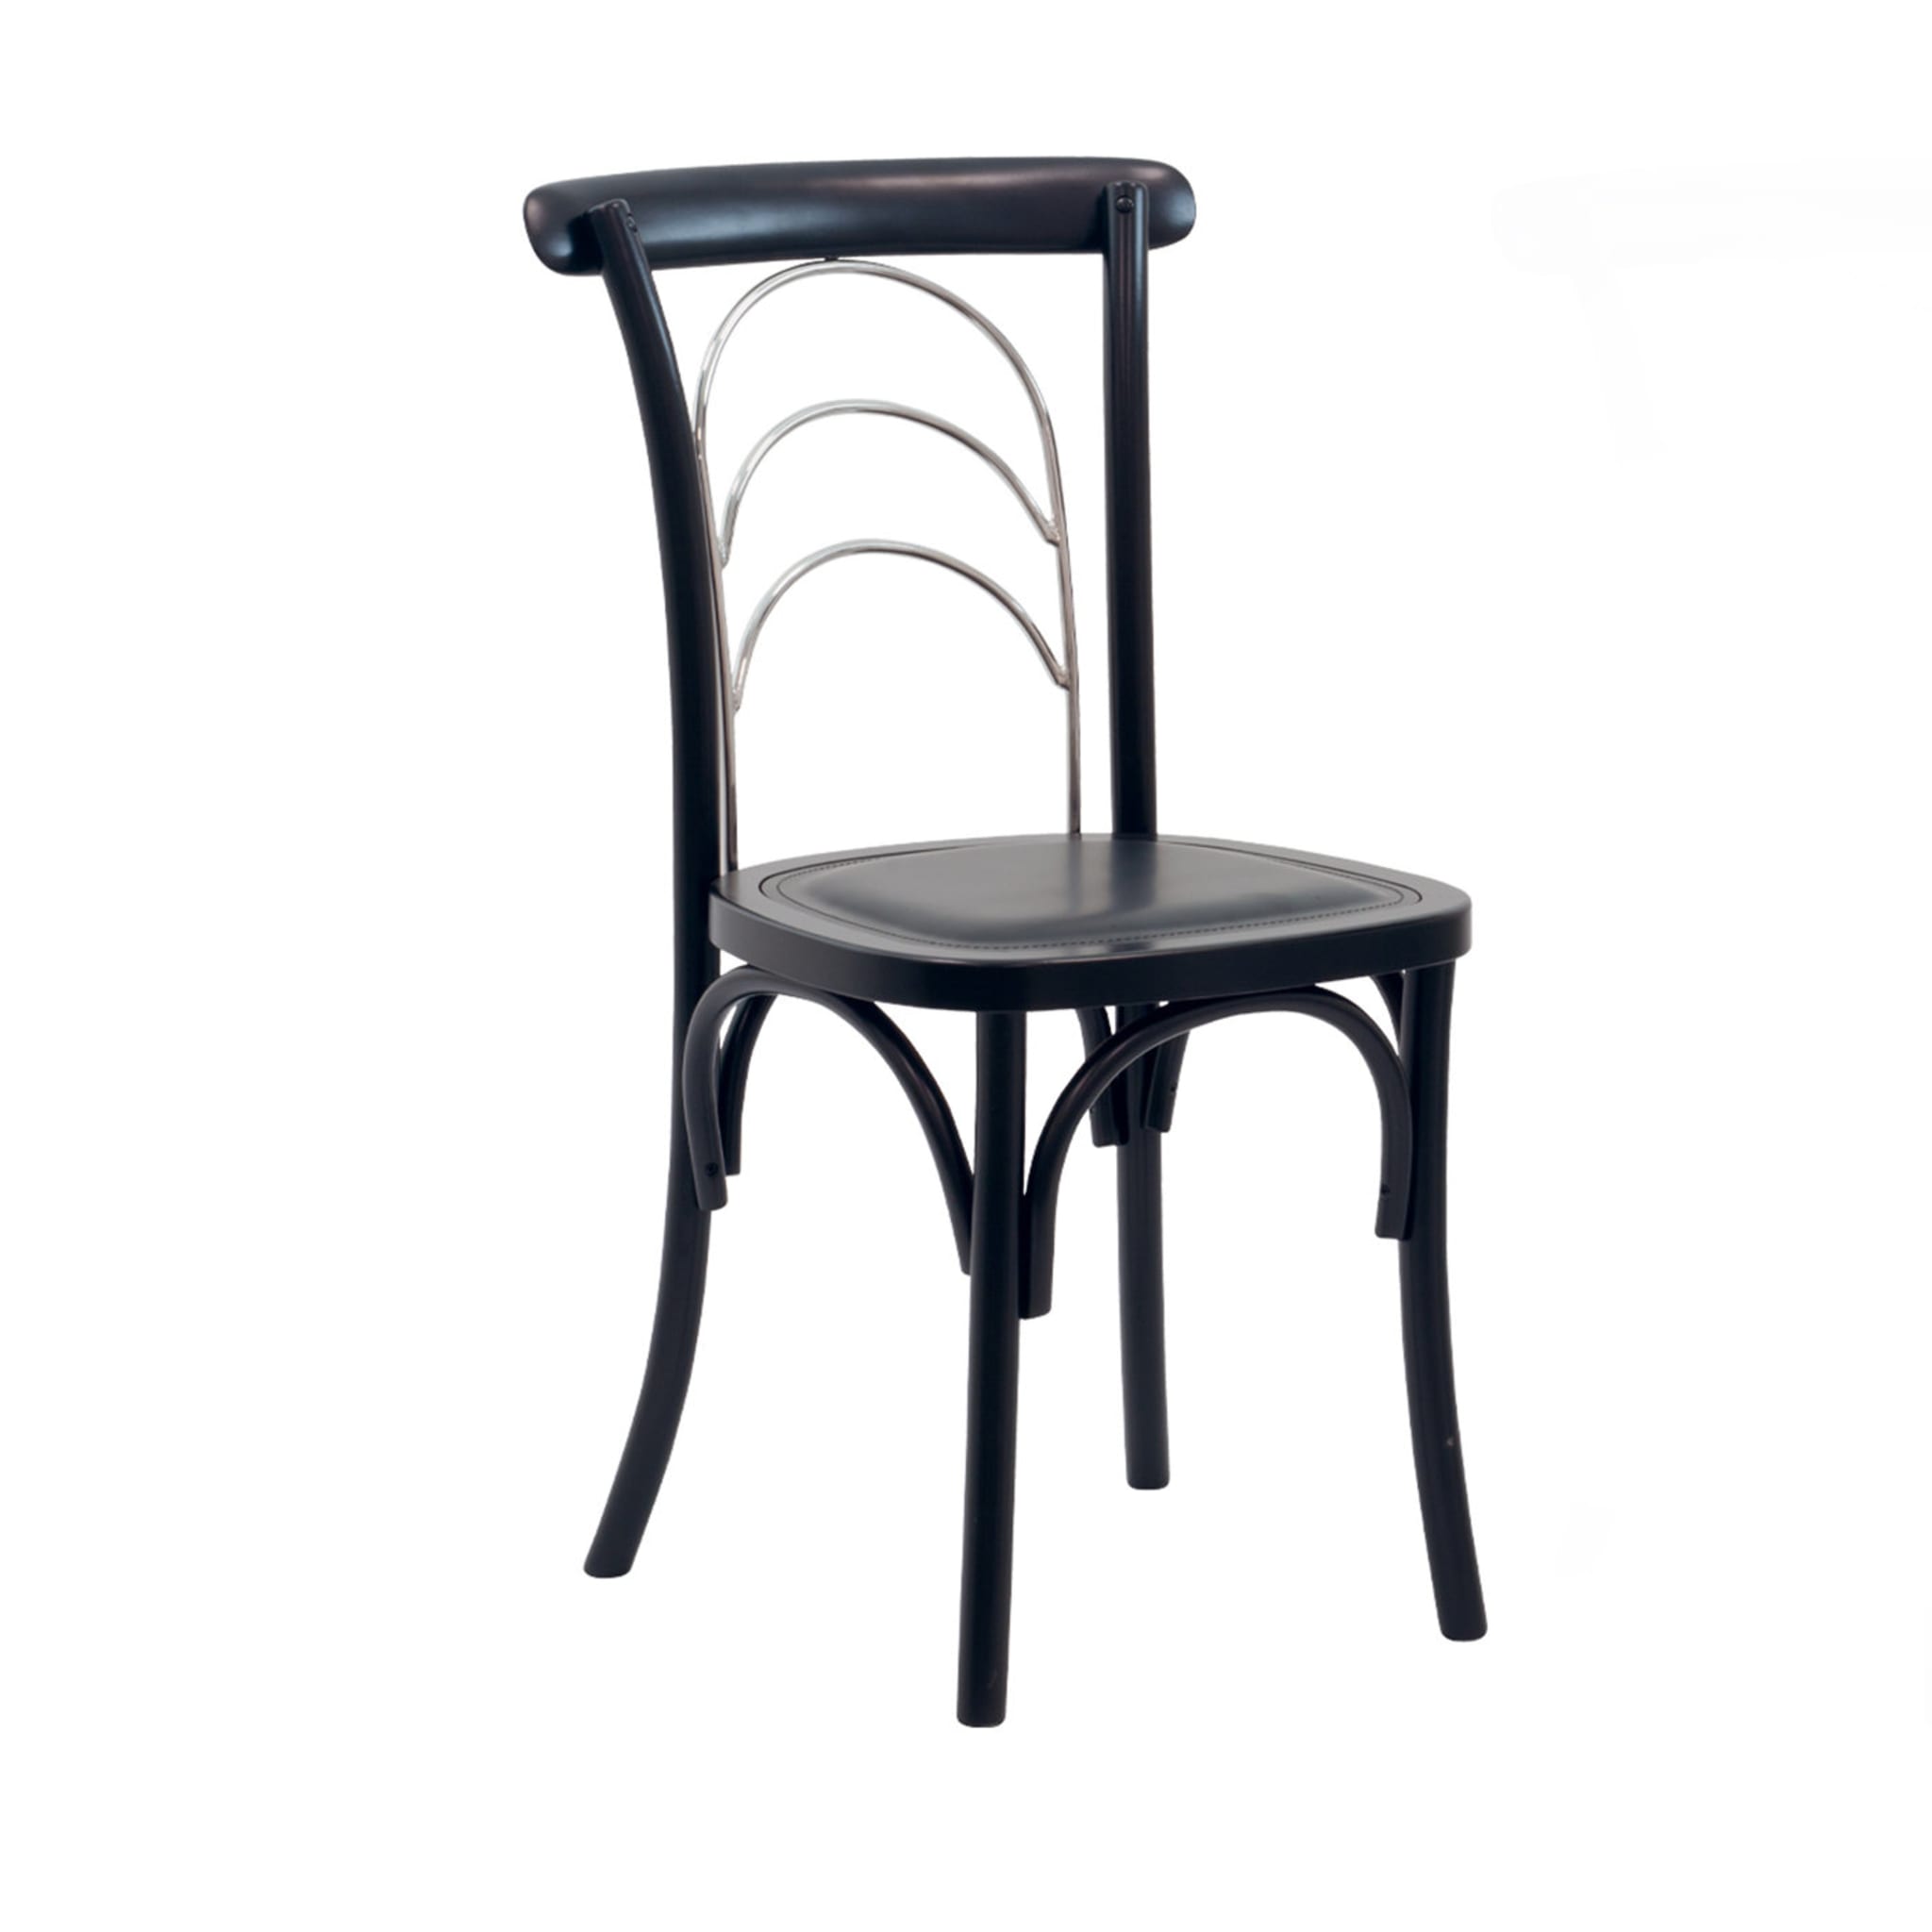 Ciao Arco Set of 2 Black Chairs - Main view